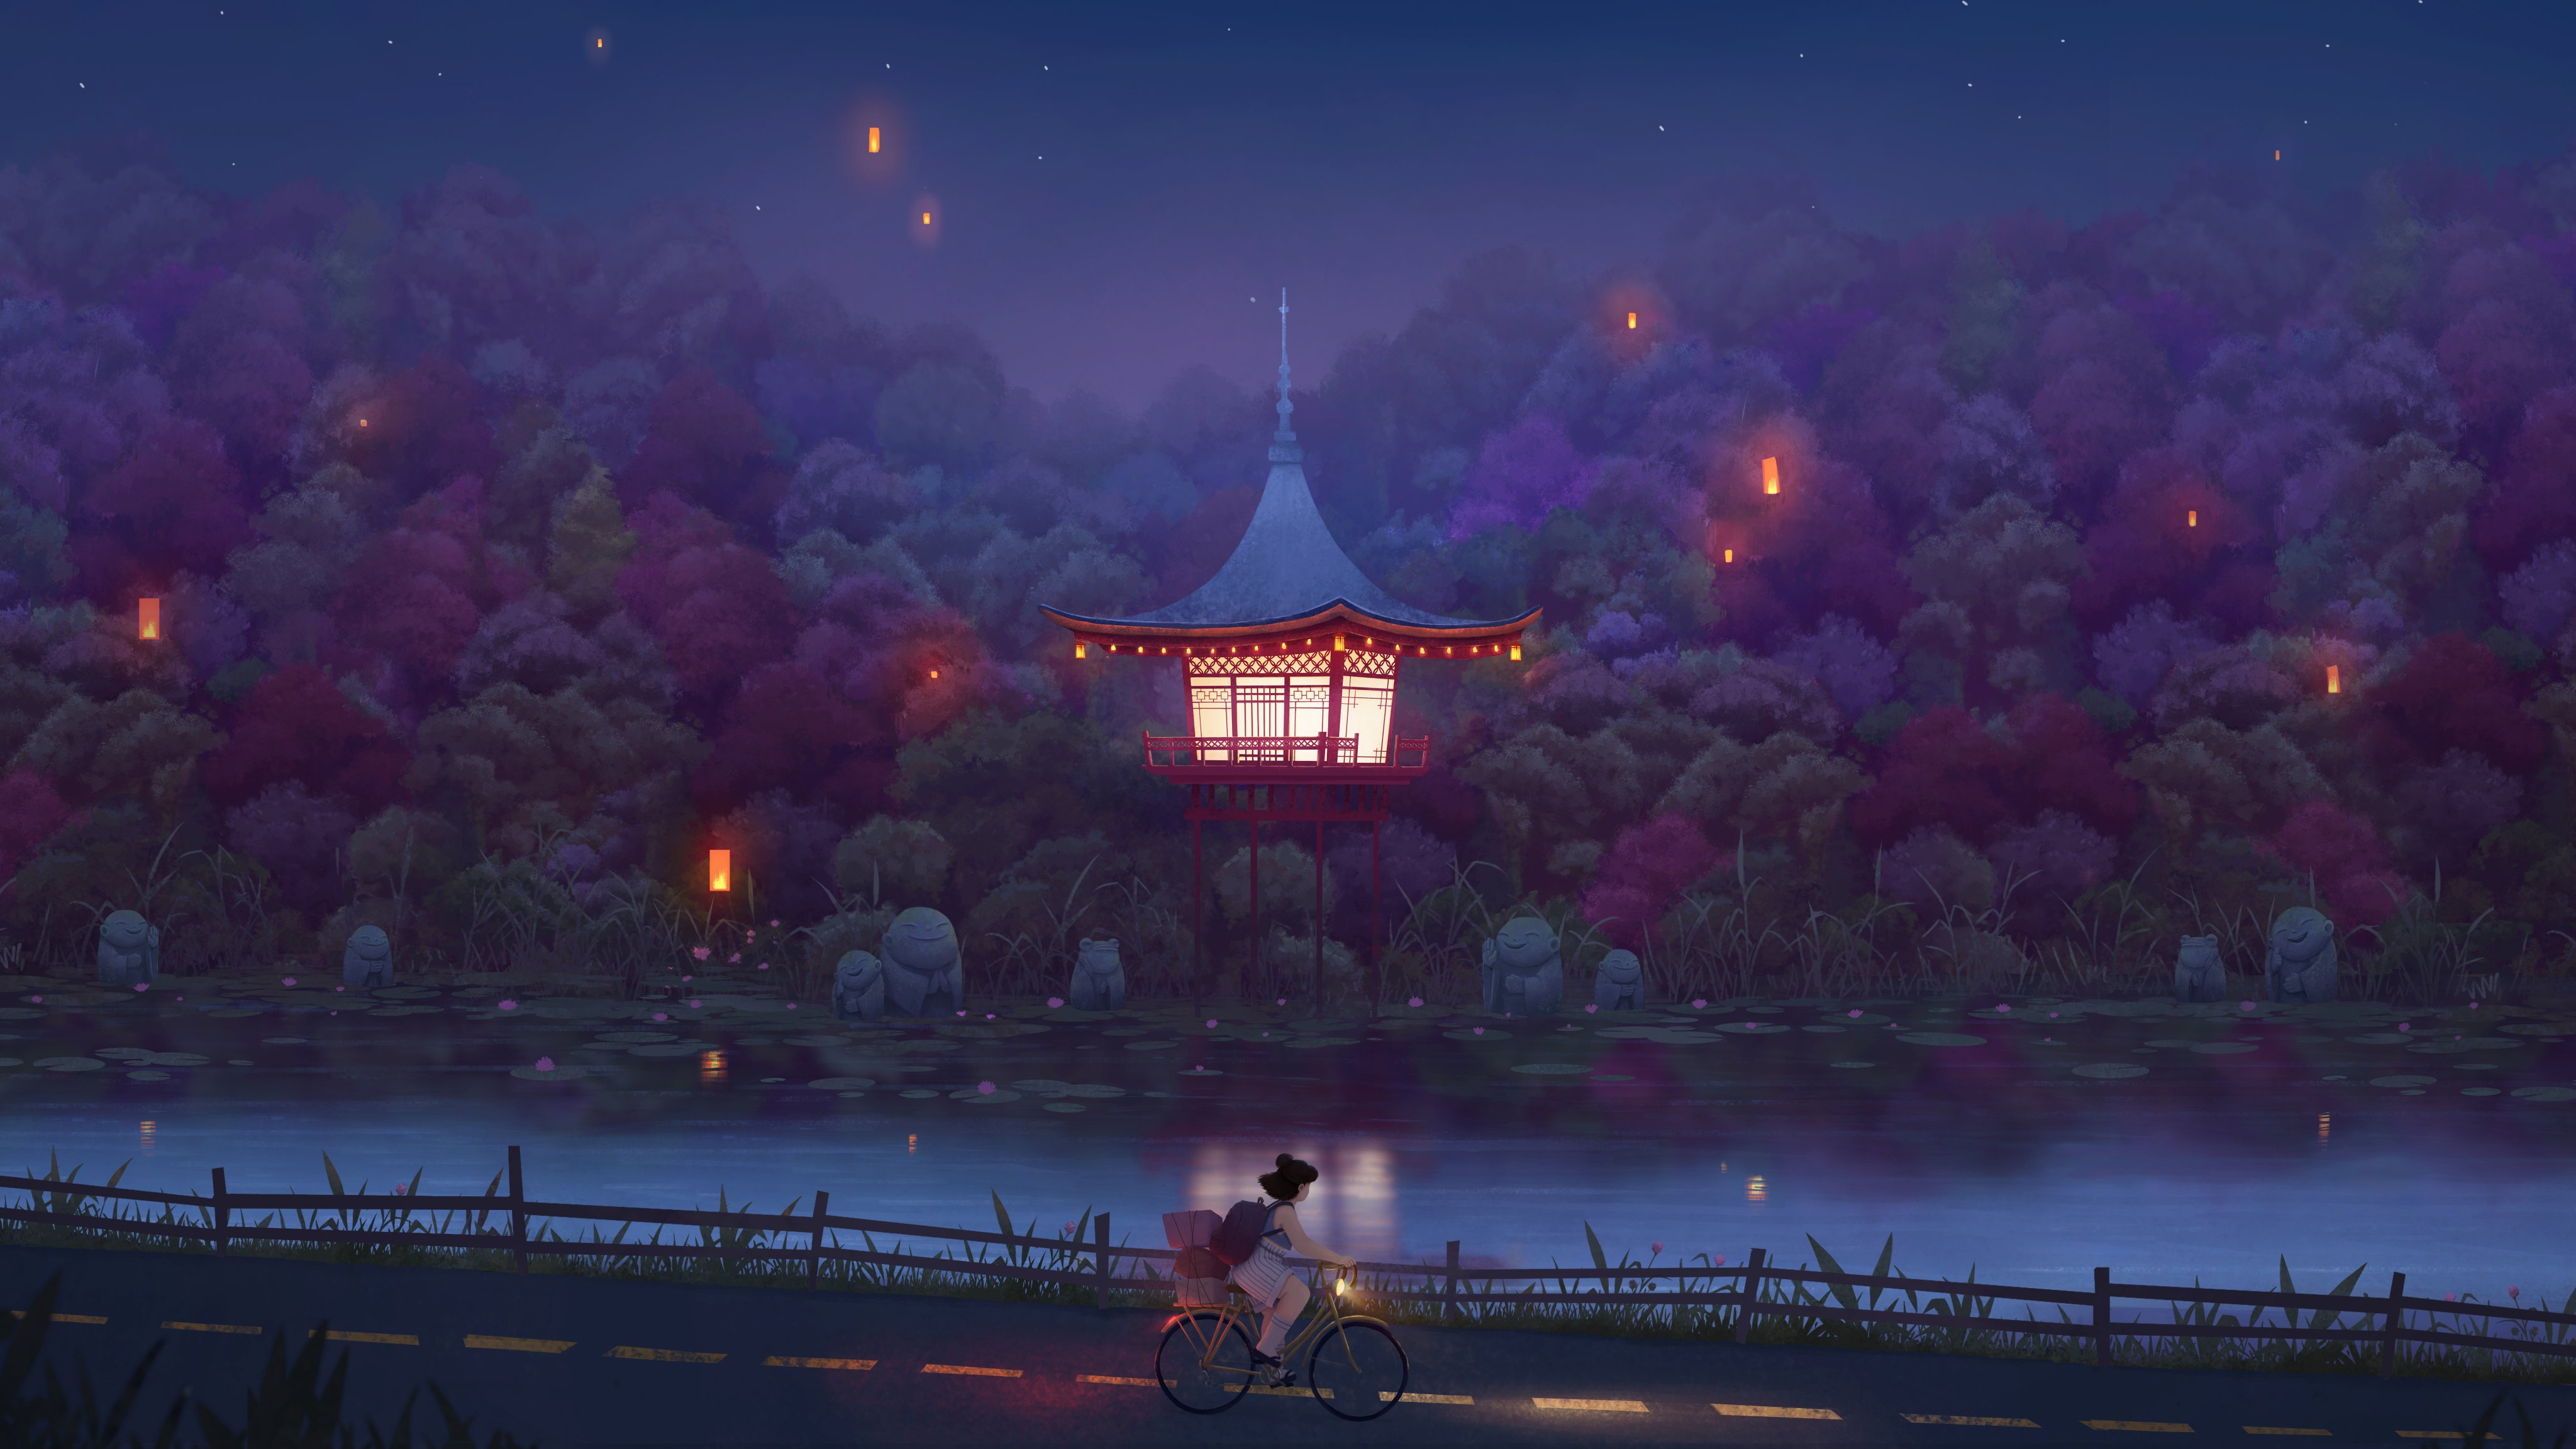 General 4096x2304 artwork Asian architecture lake road bicycle lantern forest night